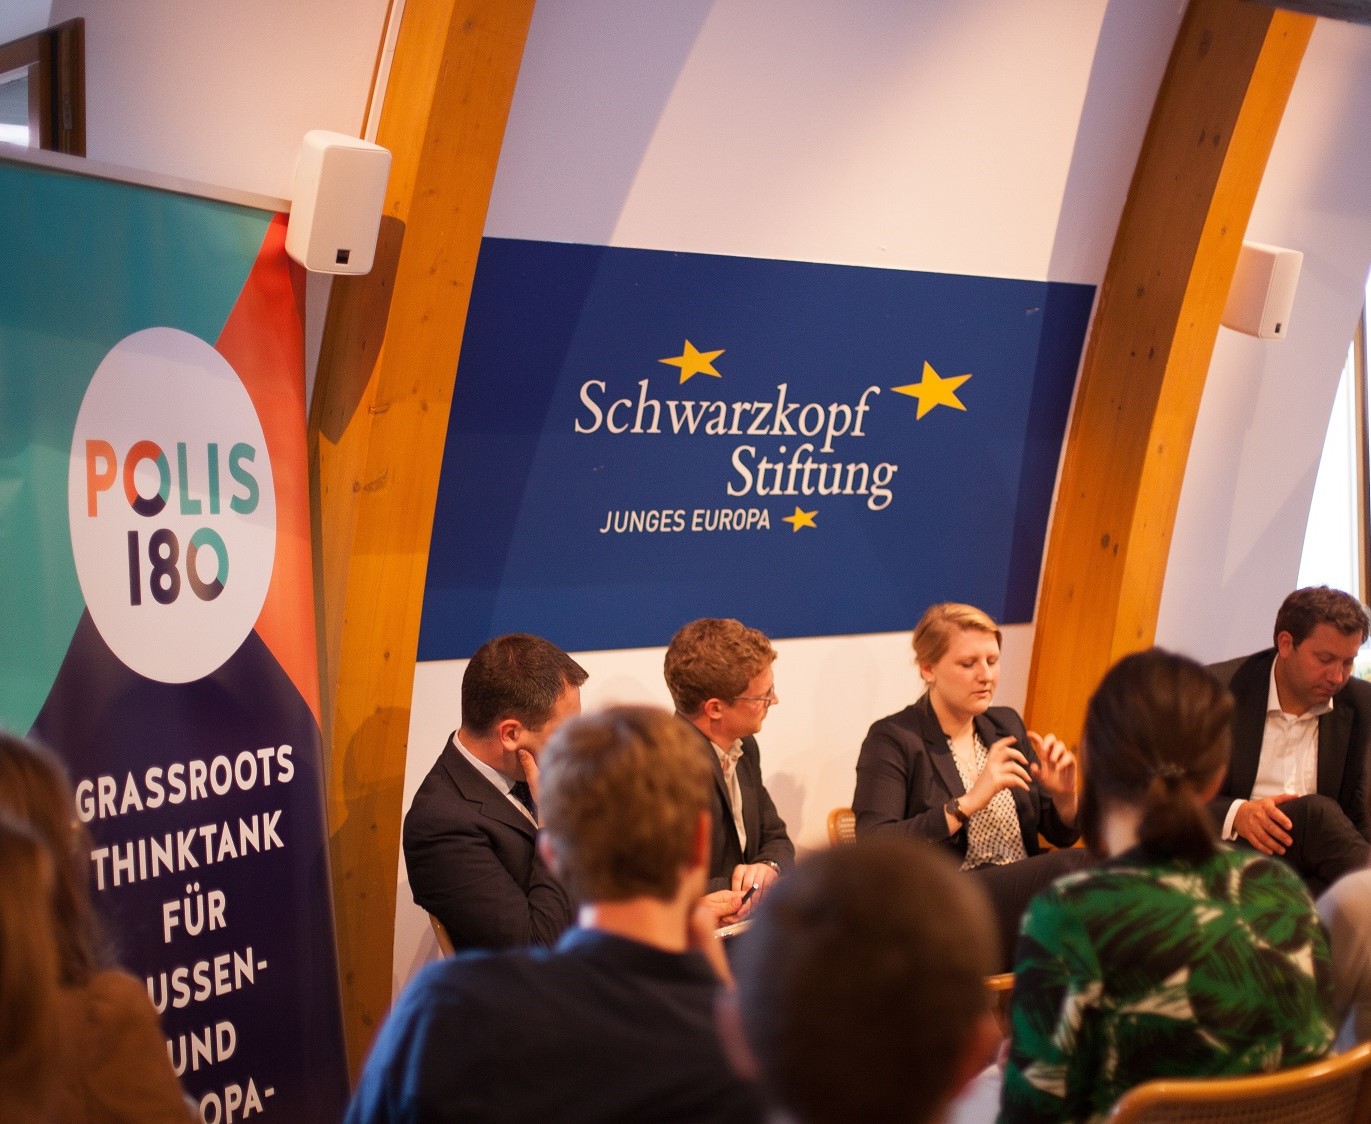 On 15 May 2017, as President Macron and Chancellor Merkel held their first official meeting in Berlin, Polis180 hosted a timely discussion on EU-Russian relations in election year 2017.
Read the text written by Elyssa Shea to get further information.